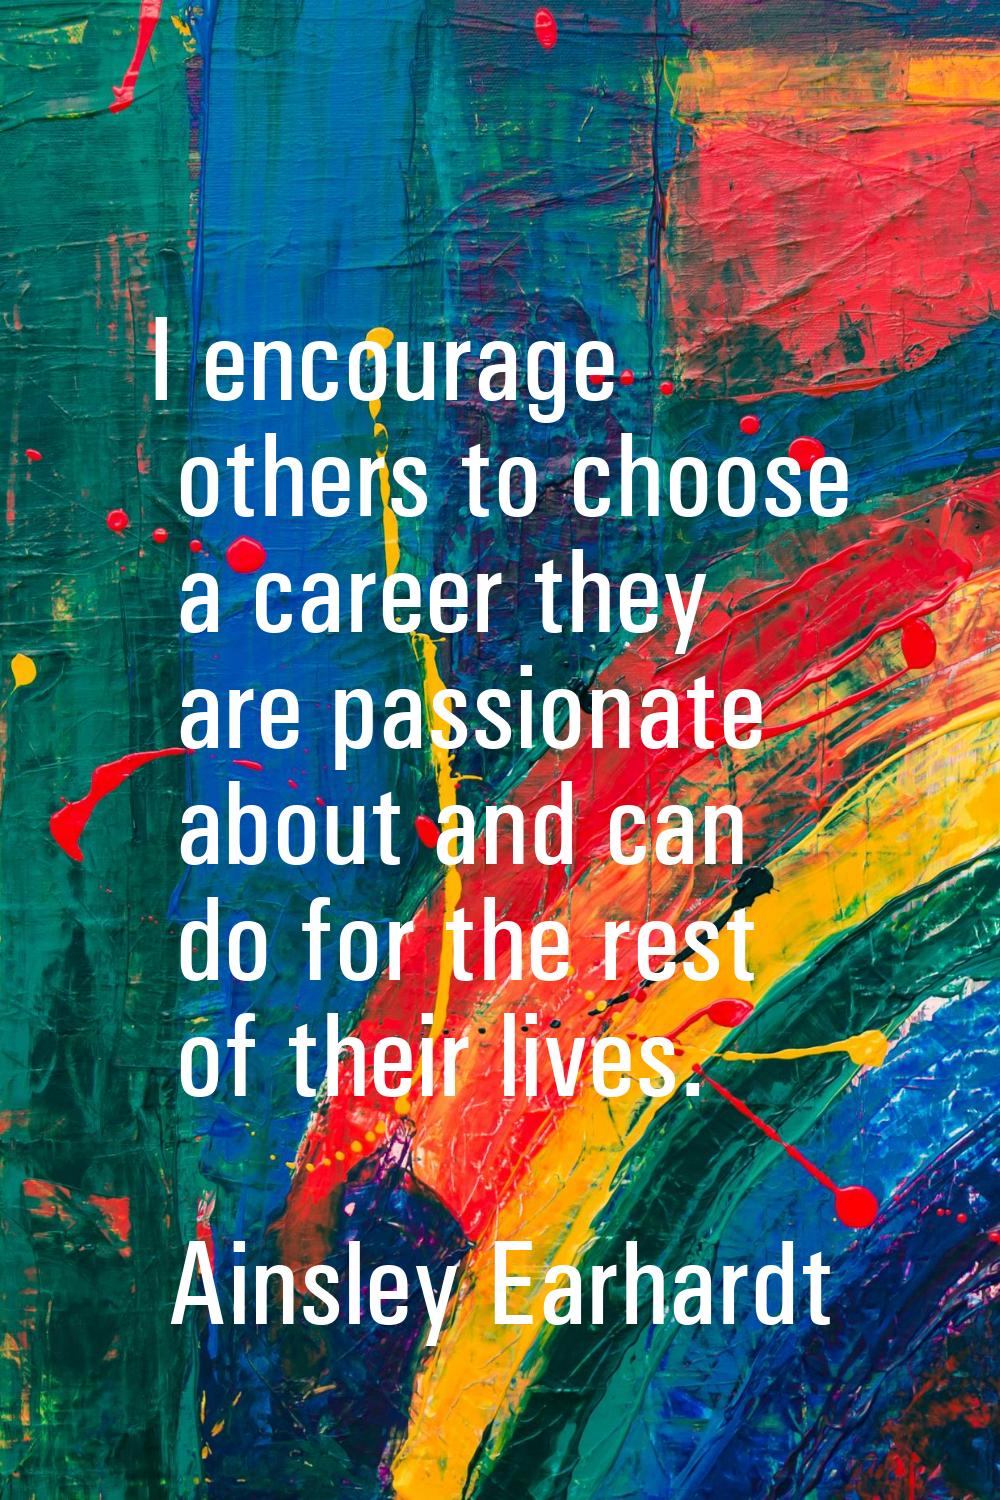 I encourage others to choose a career they are passionate about and can do for the rest of their li